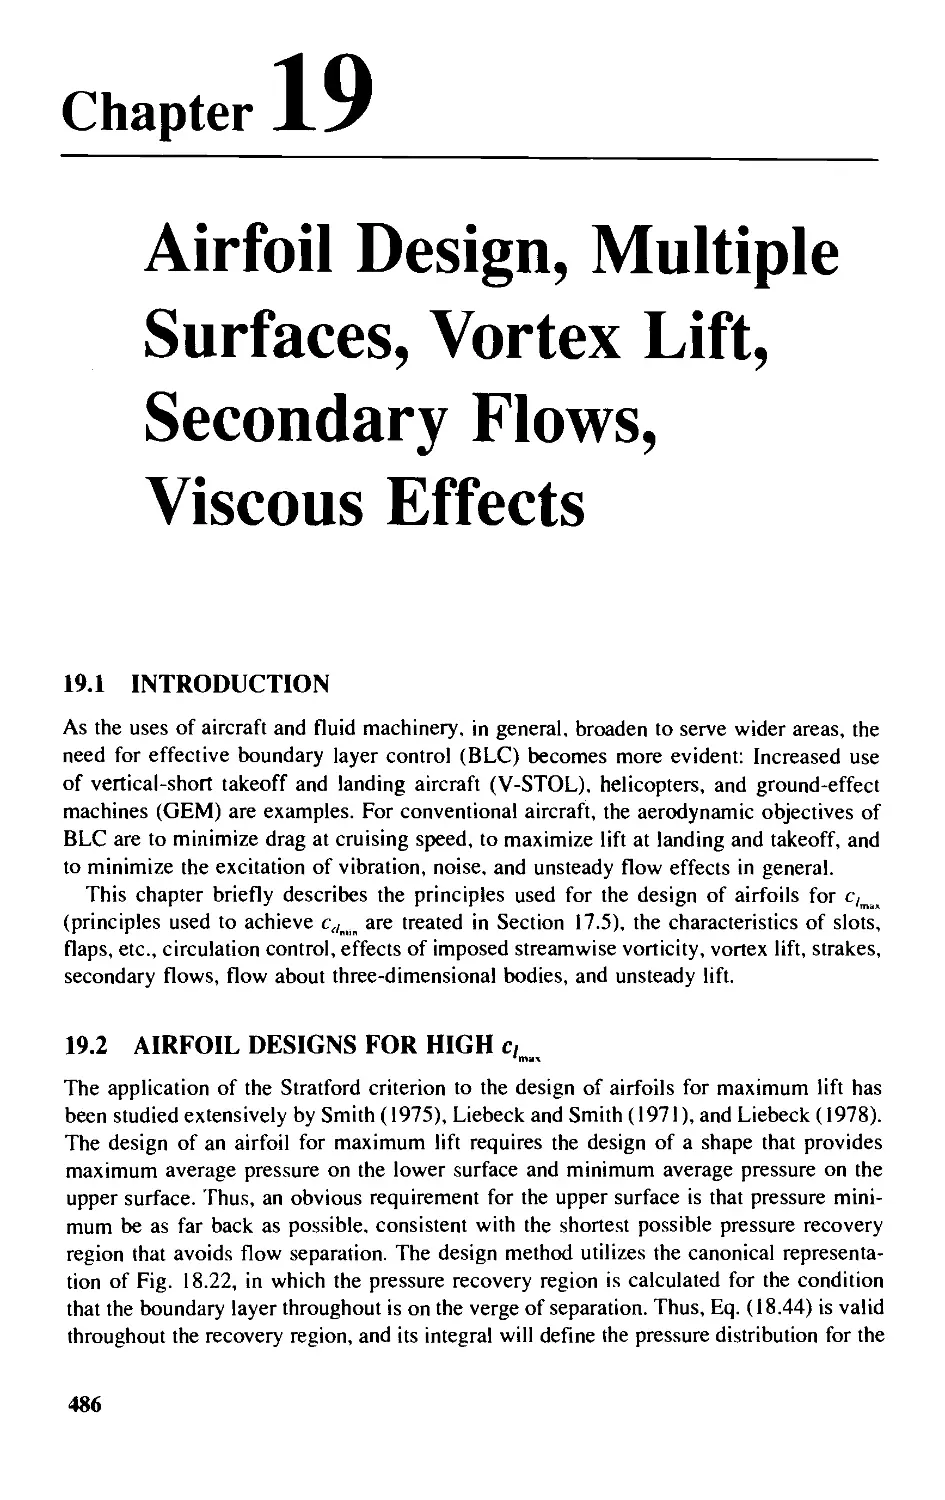 Chapter 19 - Airfoil Design, Multiple Surfaces, Vortex Lift, Secondary Flows, Viscous Effects
19.2 - Airfoil Designs for High Clmax